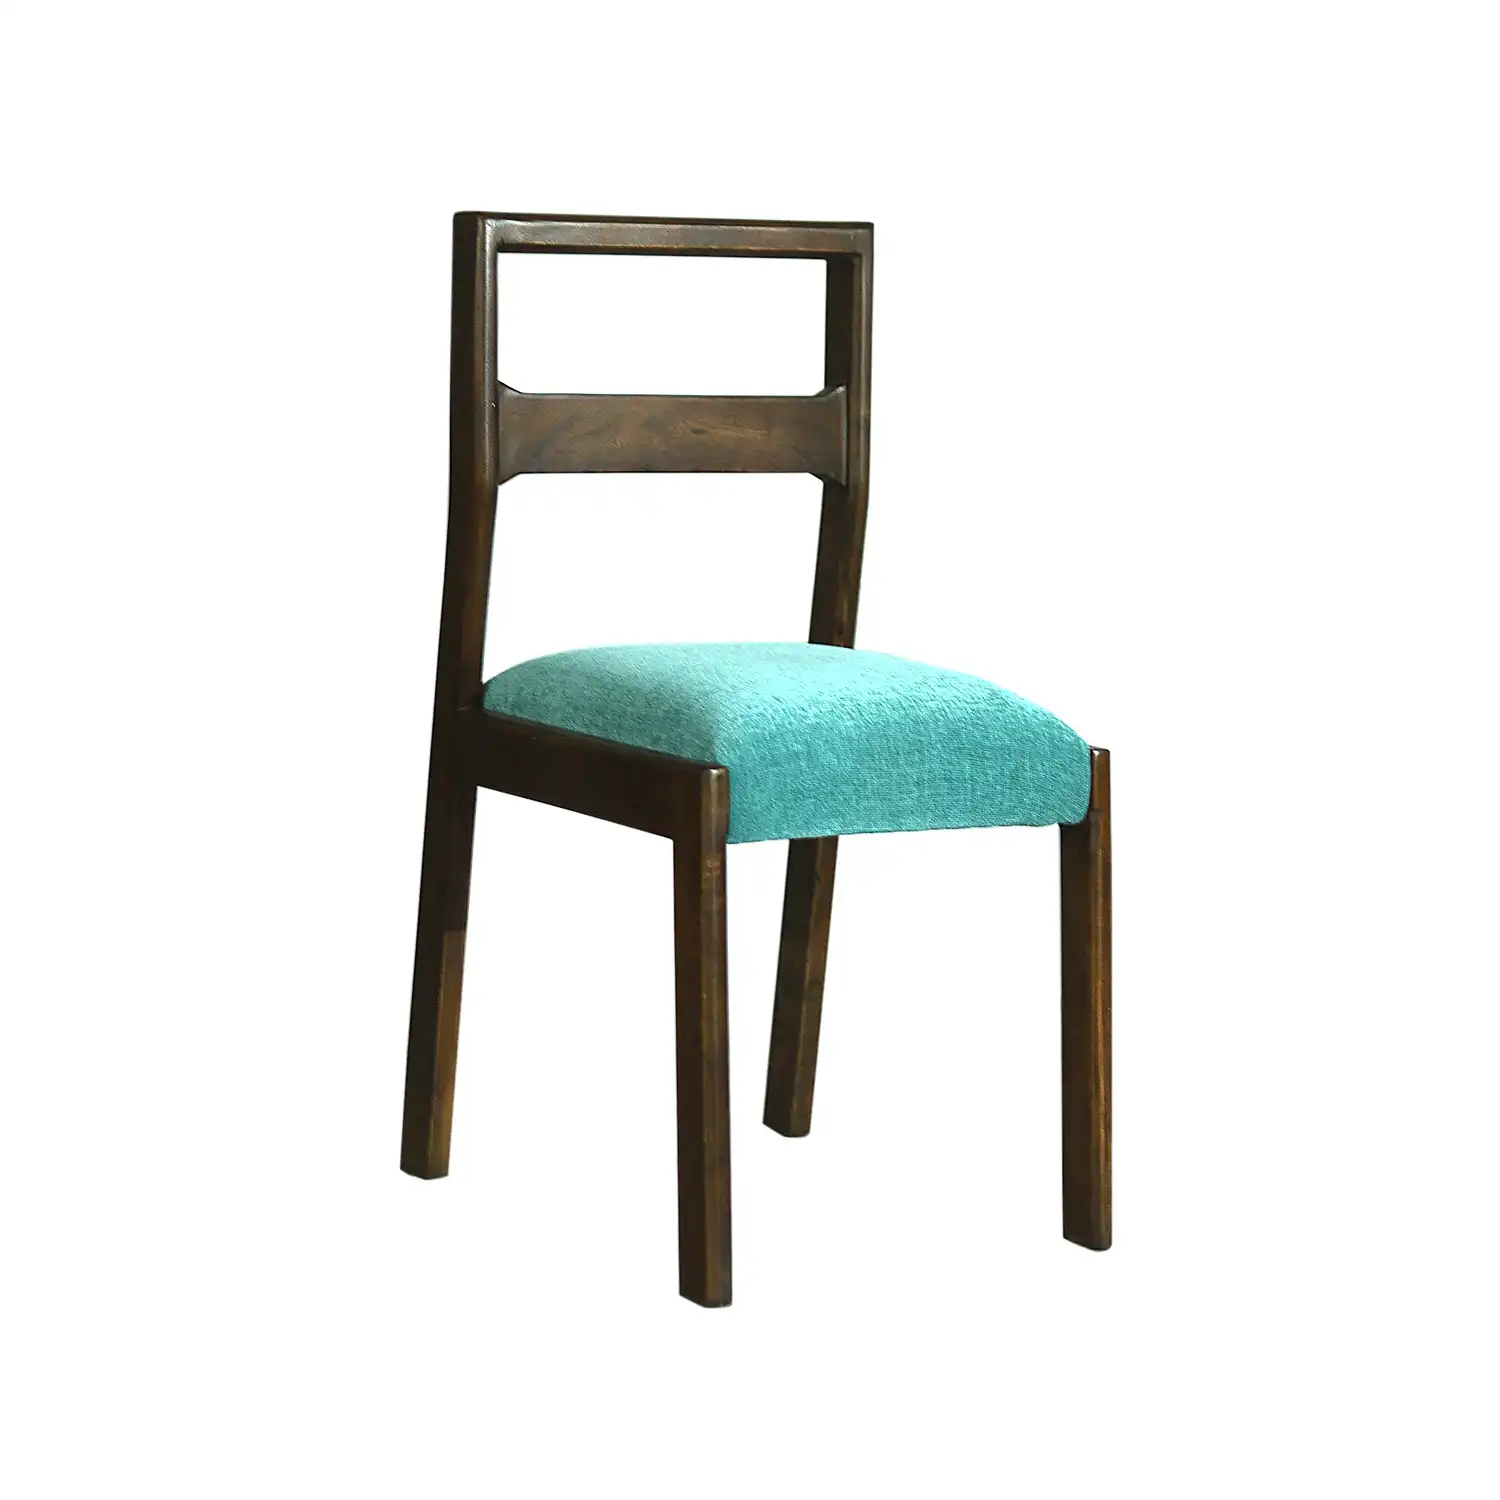 Acacia Wood Upholstered Dining Chair - Set of 2 Chairs - popular handicrafts